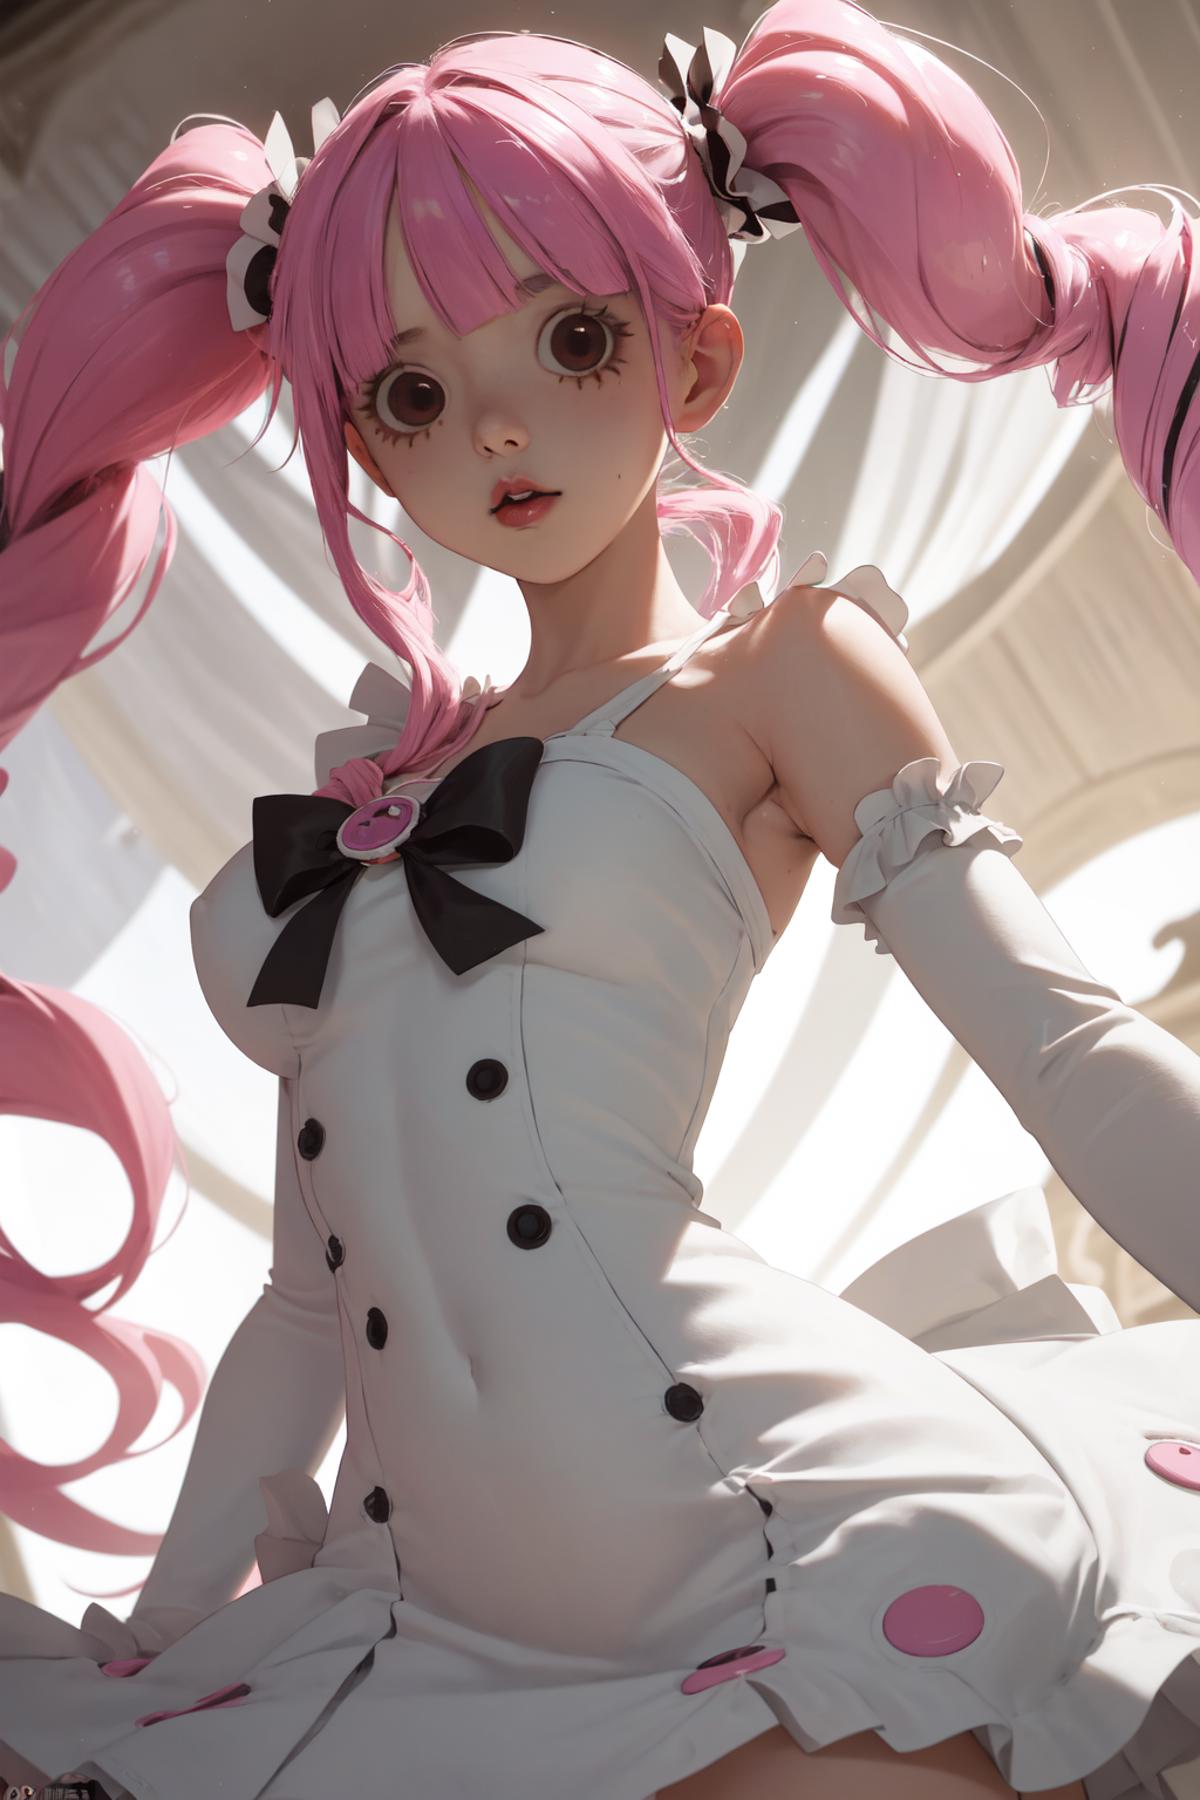 Perona | One Piece image by YeahBoy1999